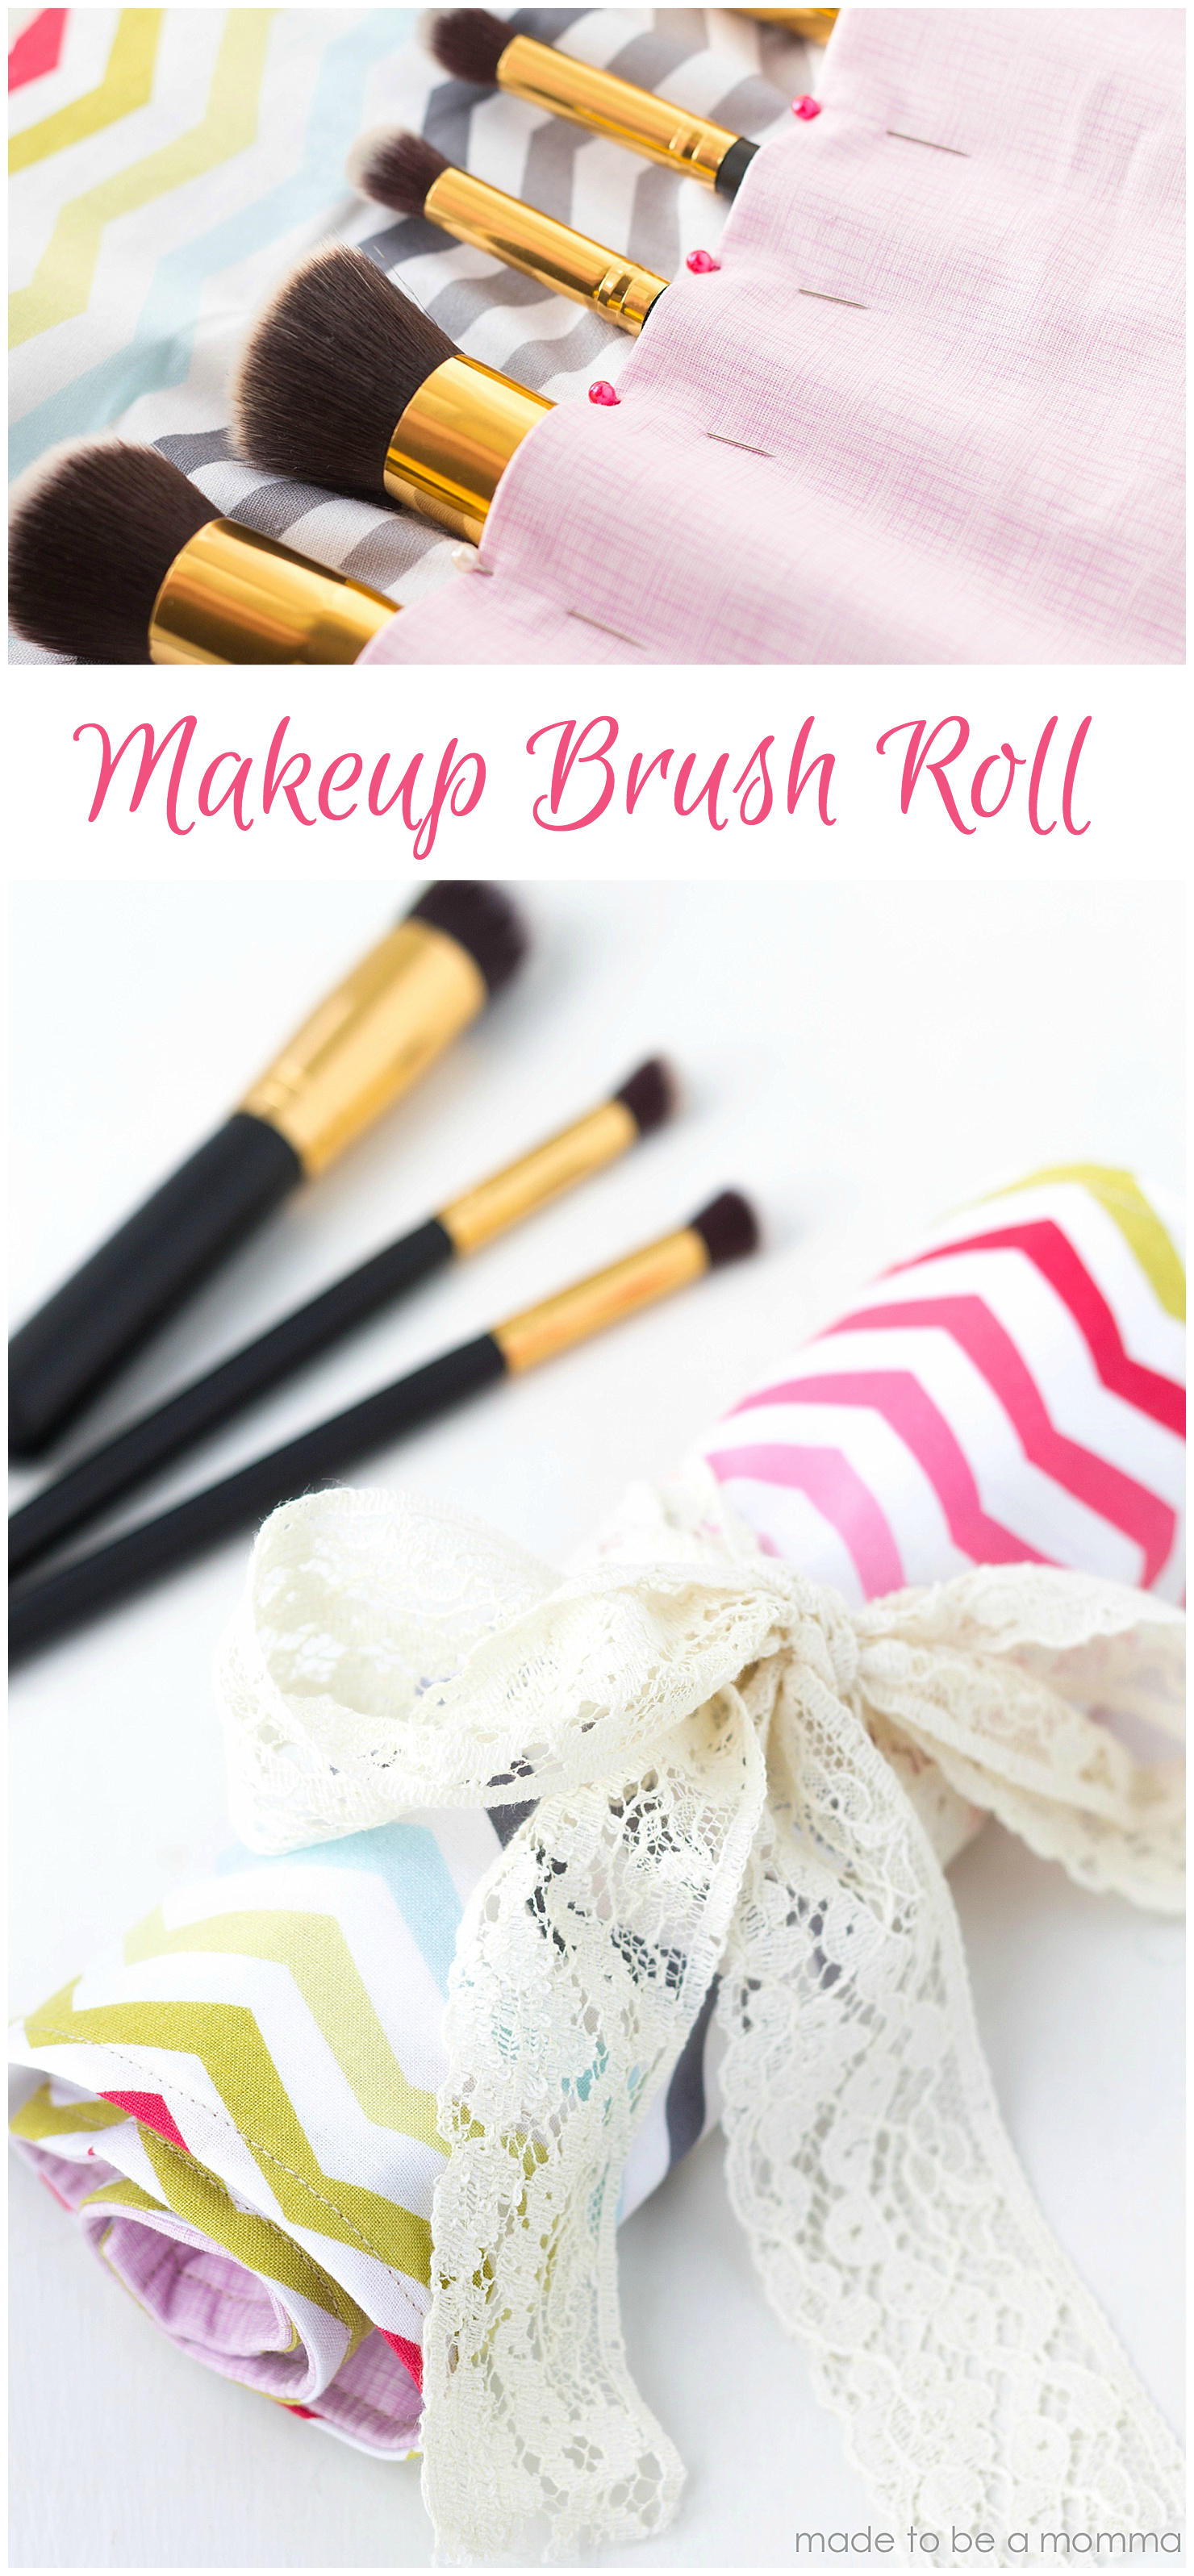 http://www.madetobeamomma.com/wp-content/uploads/2015/09/Makeup-Brush-Roll.png